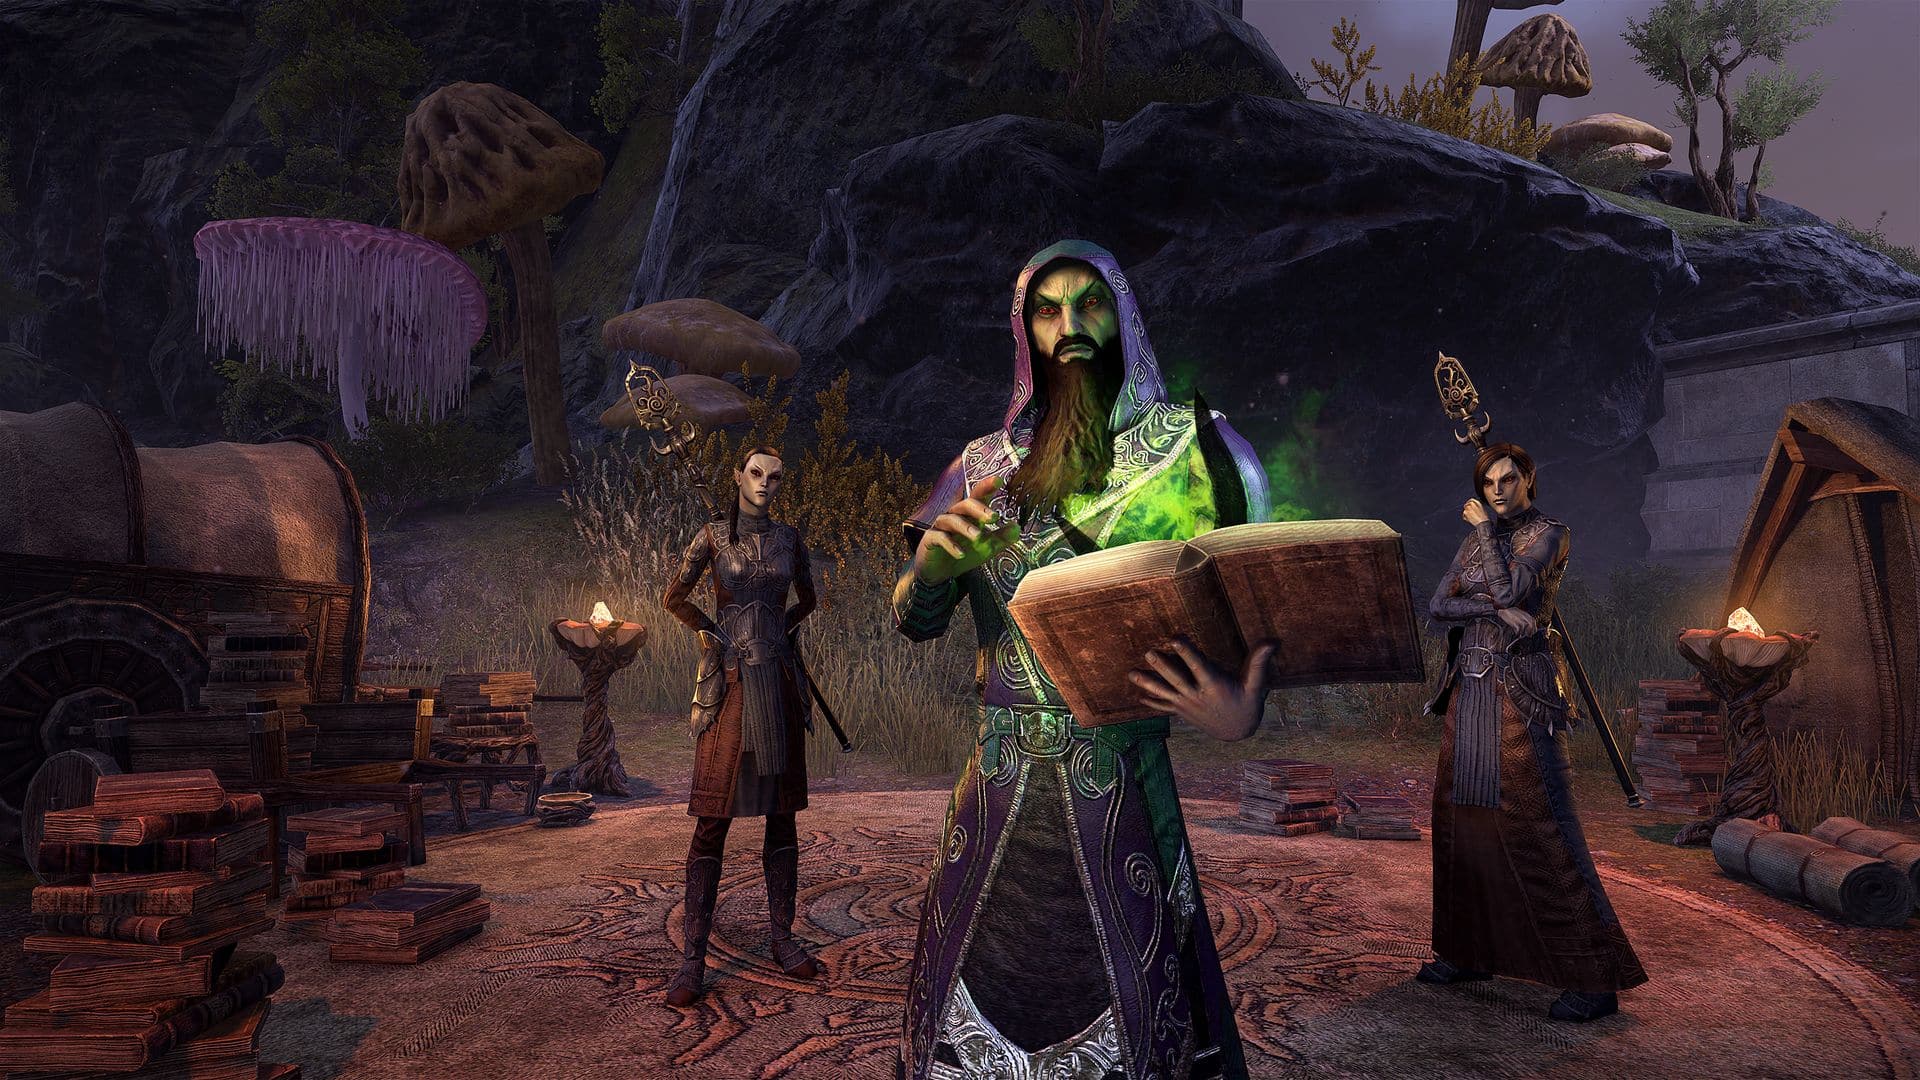 ESO Devs Remind Players of Necrom Pre-Purchase Rewards 